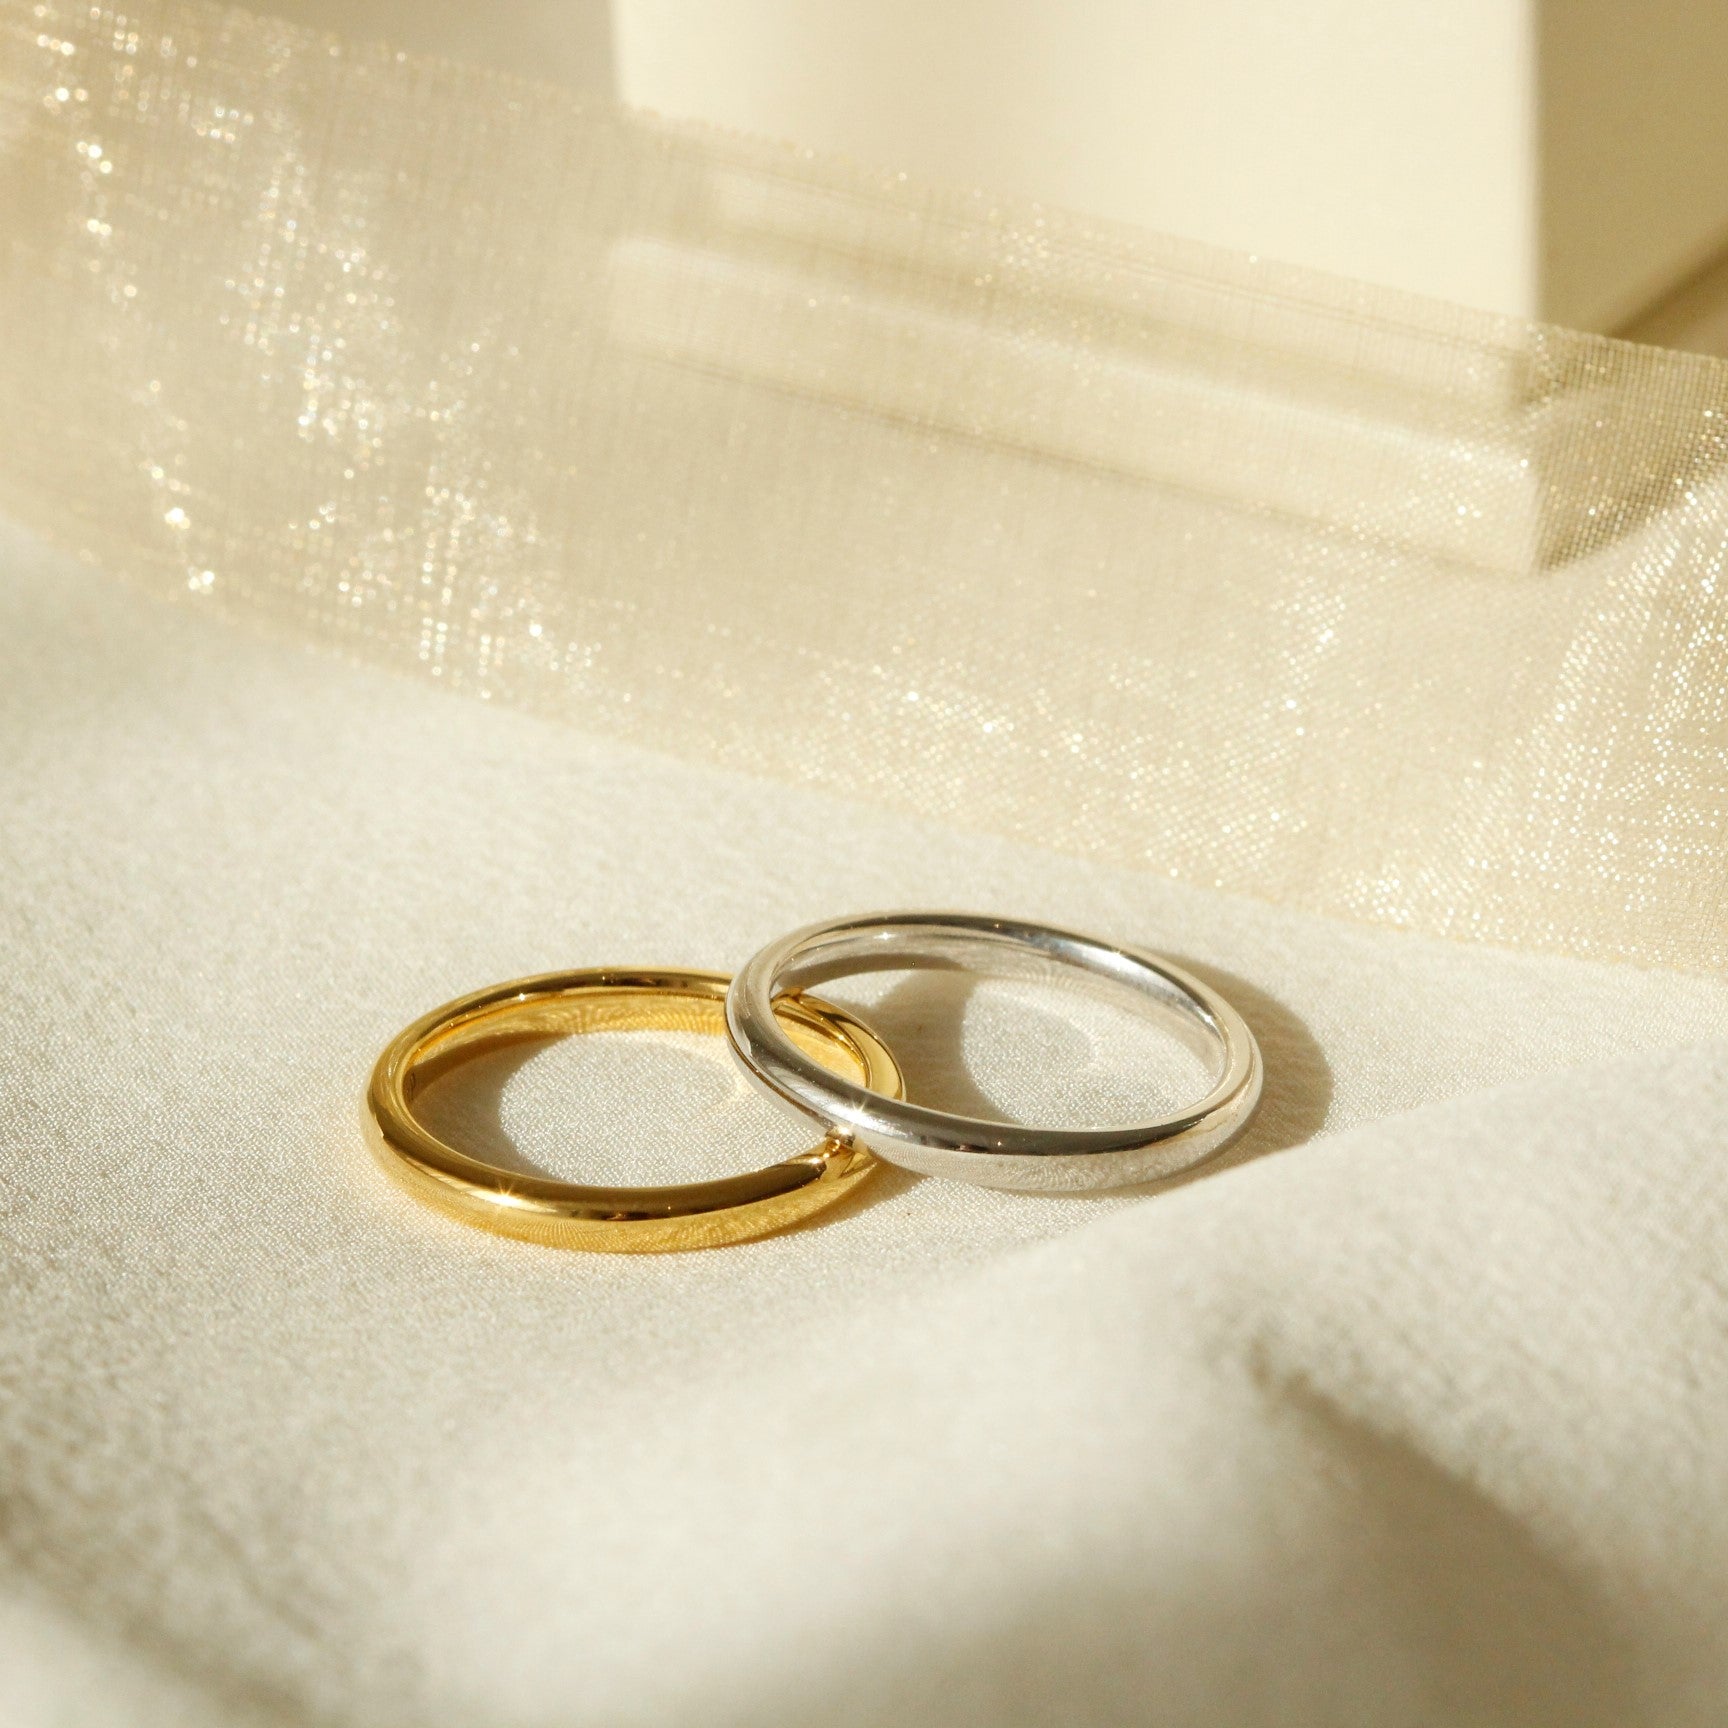 Wedding Rings laying on one another on cloth in the sun, one is yellow gold and the other is white gold